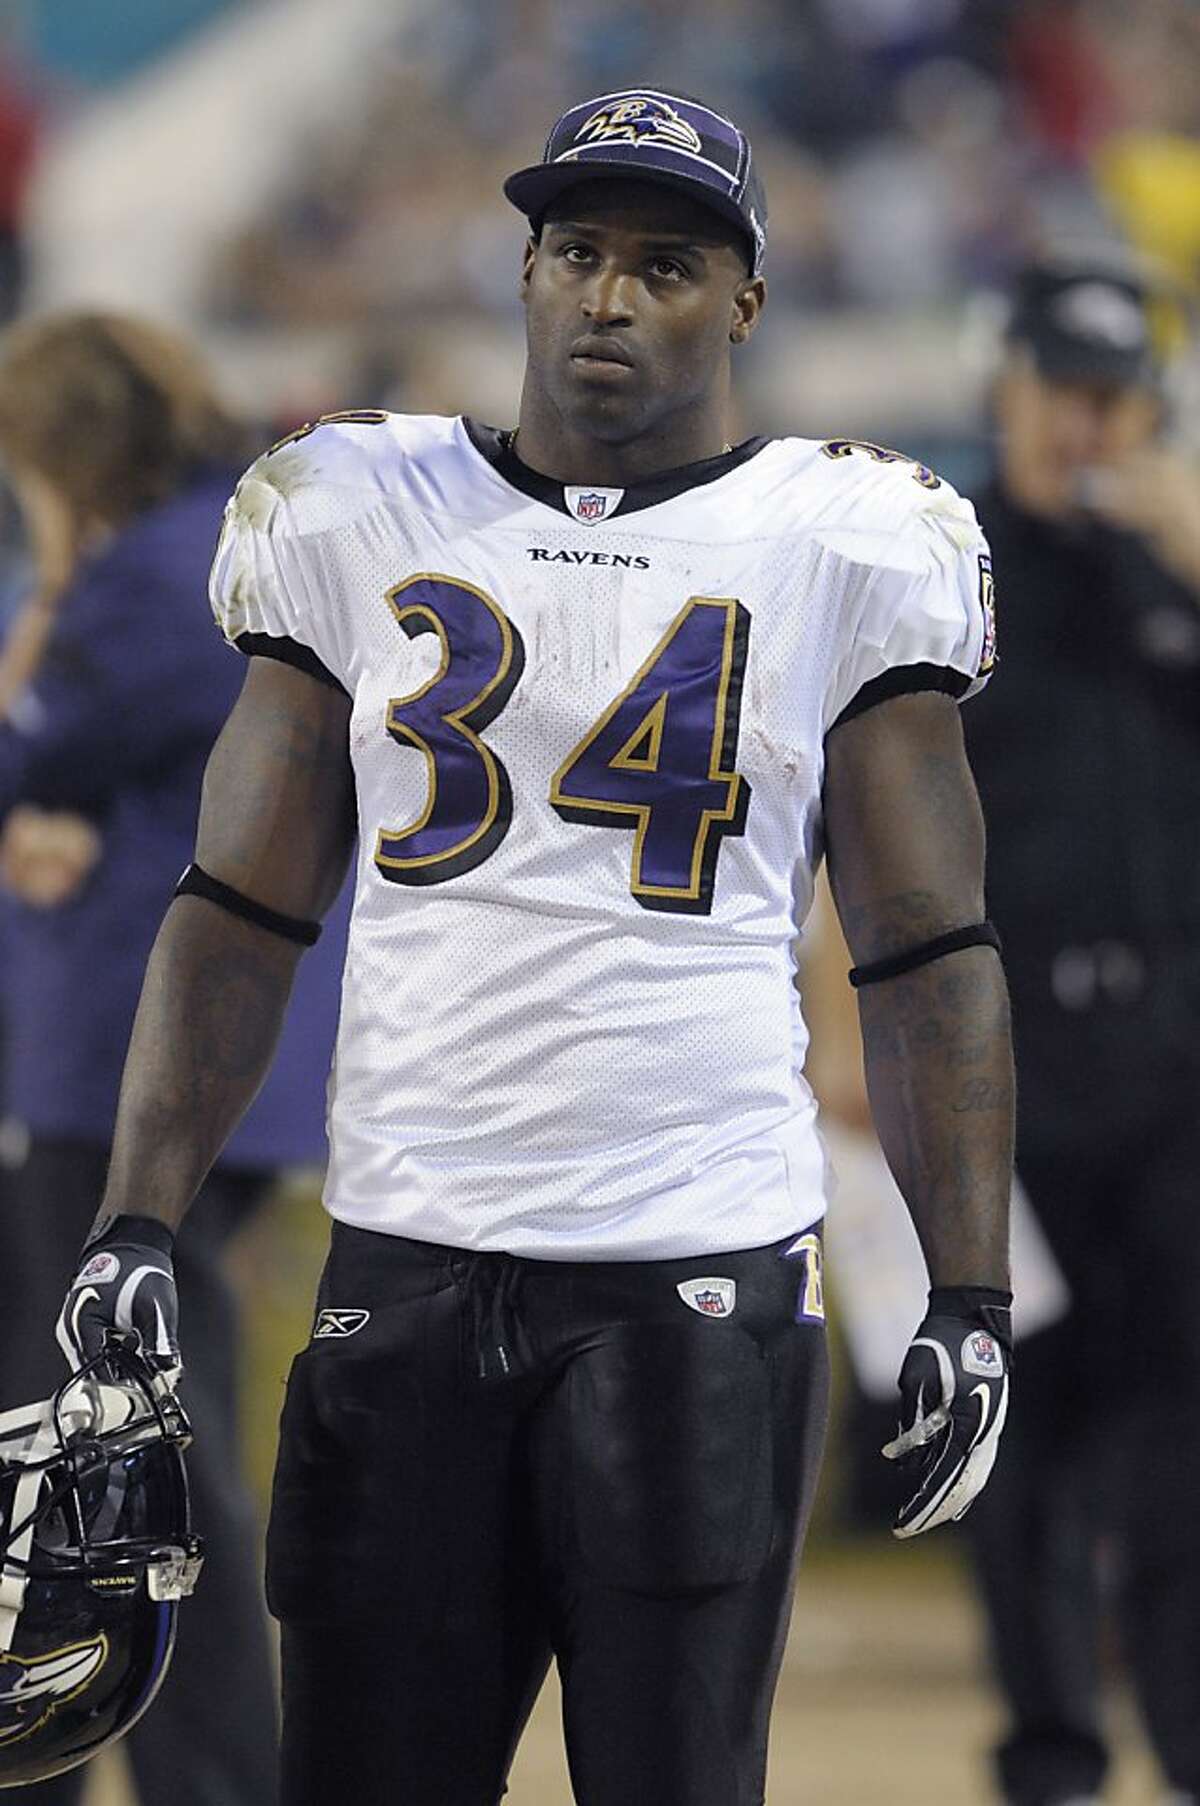 In this Oct. 24, 2011, photo, Baltimore Ravens running back Ricky Williams watches from the sideline during an NFL football game against the Jacksonville Jaguars in Jacksonville, Fla. Williams is retiring. The 34-year-old Williams told the Ravens on Tuesday, Feb. 7, 2012, he won't be back to fulfill the second year of a contract he signed in August. Playing as a backup to Ray Rice this year, Williams ran for 444 yards and scored two touchdowns. (AP Photo/Phelan M. Ebenhack)